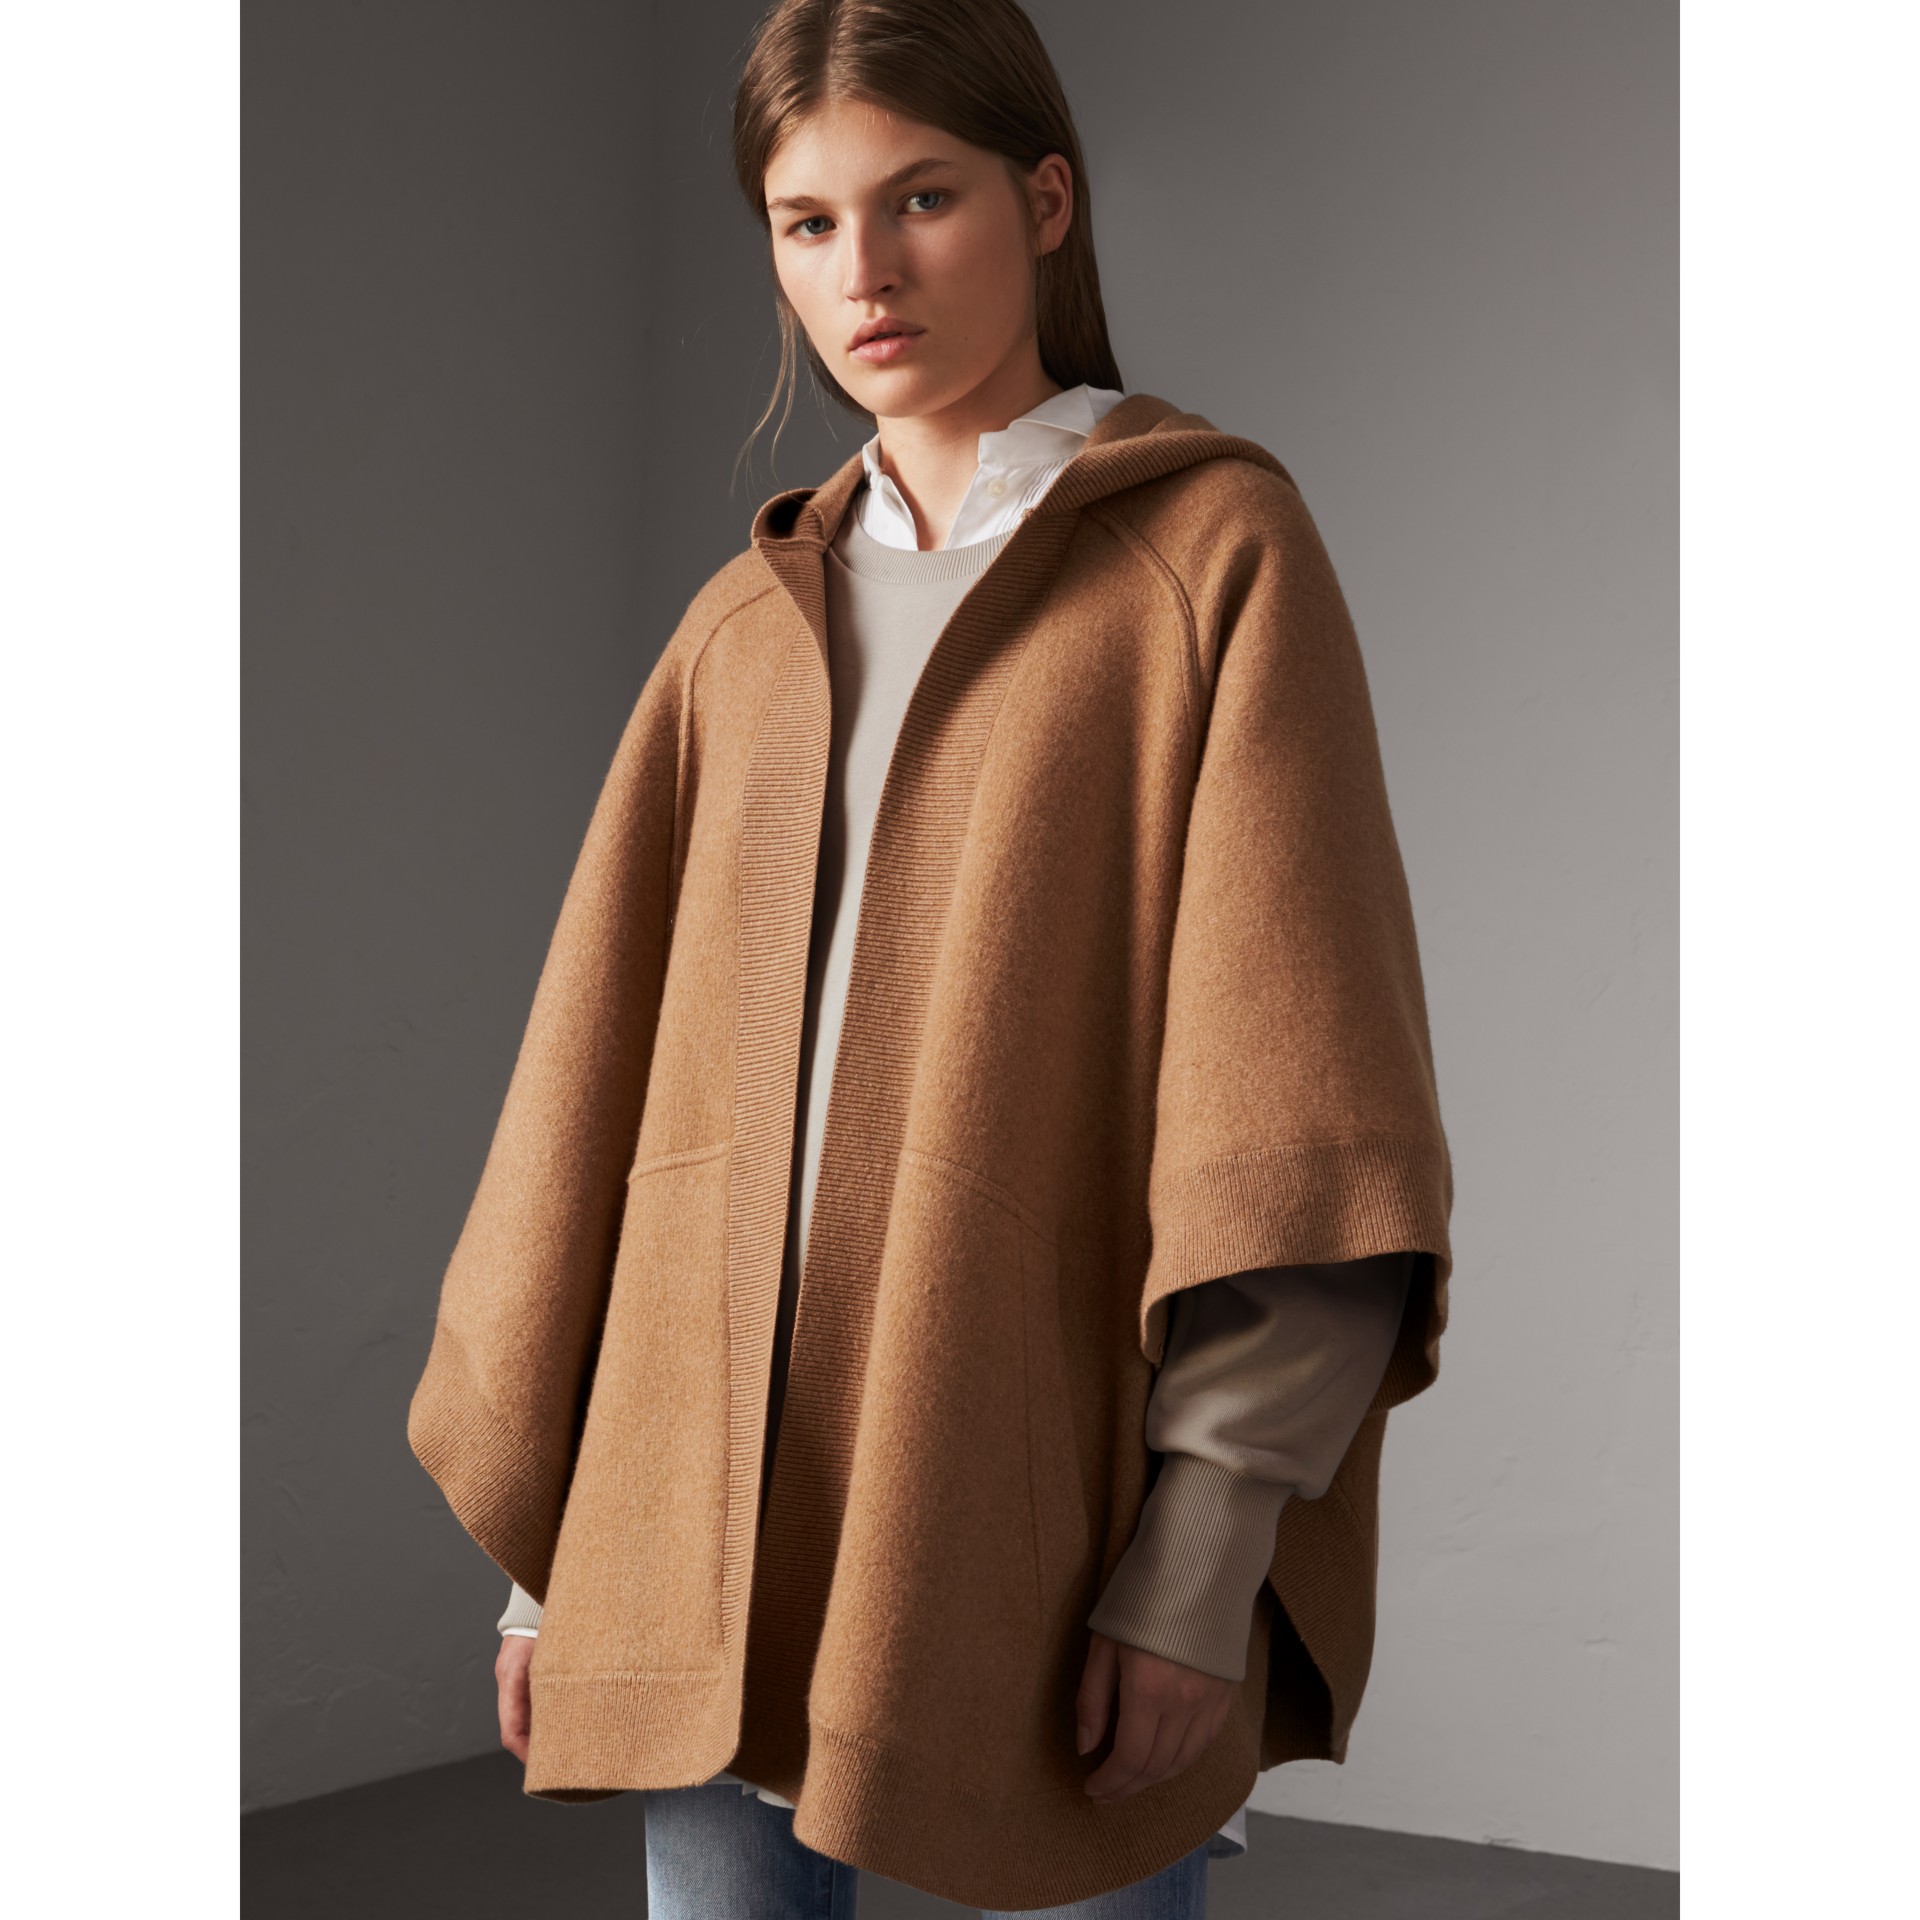 Wool Cashmere Blend Hooded Poncho in Camel - Women | Burberry Canada